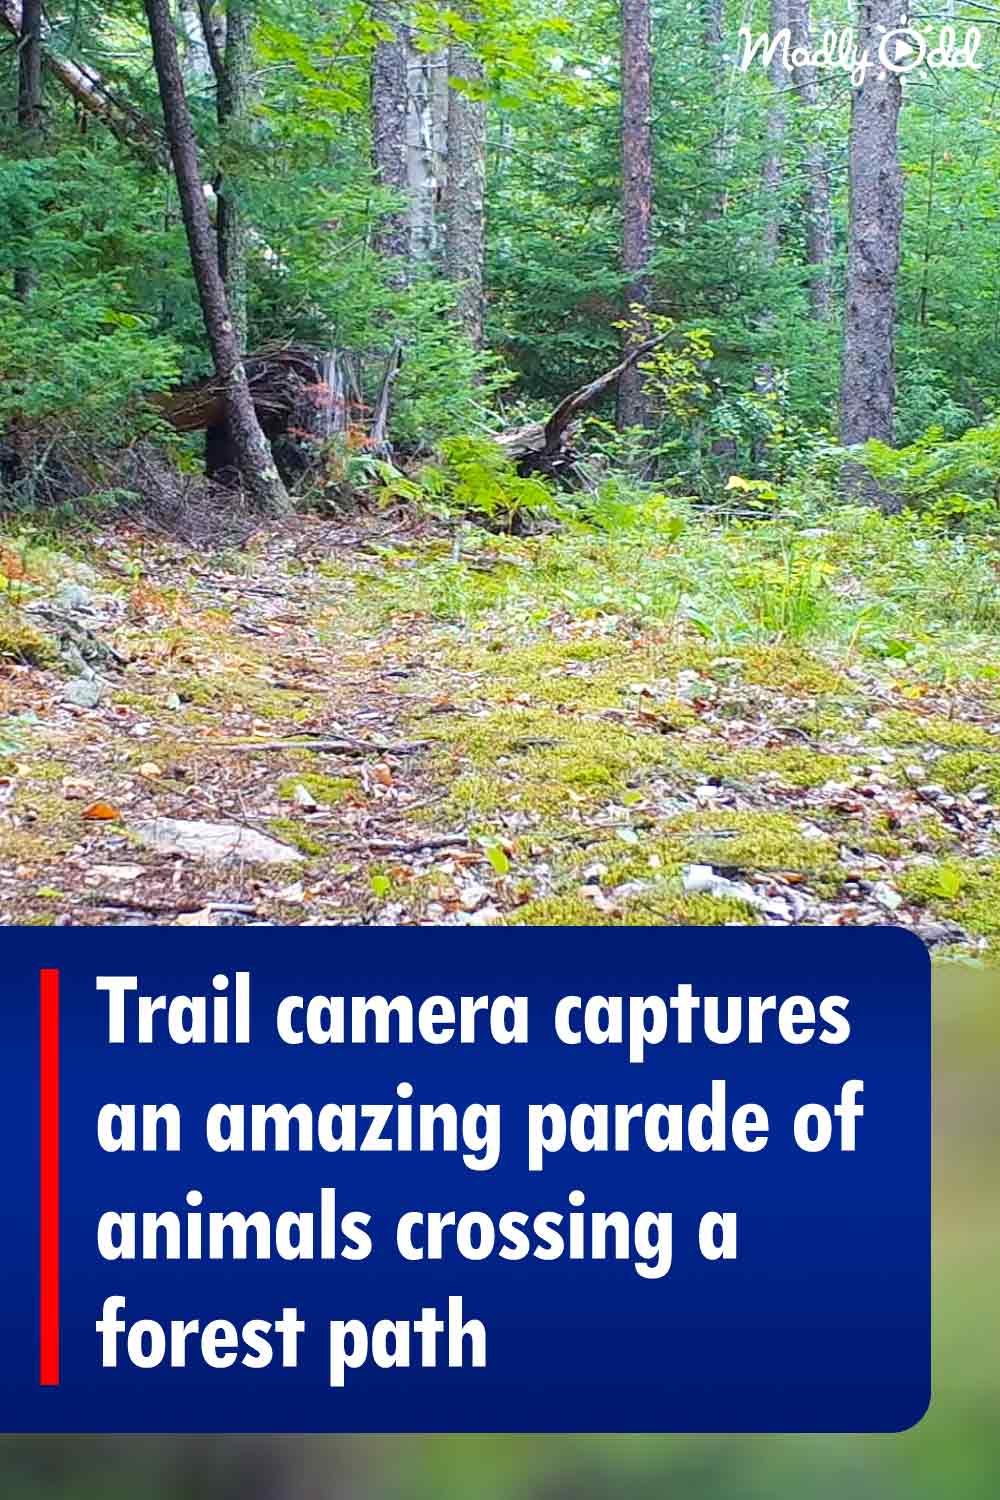 Trail camera captures an amazing parade of animals crossing a forest path